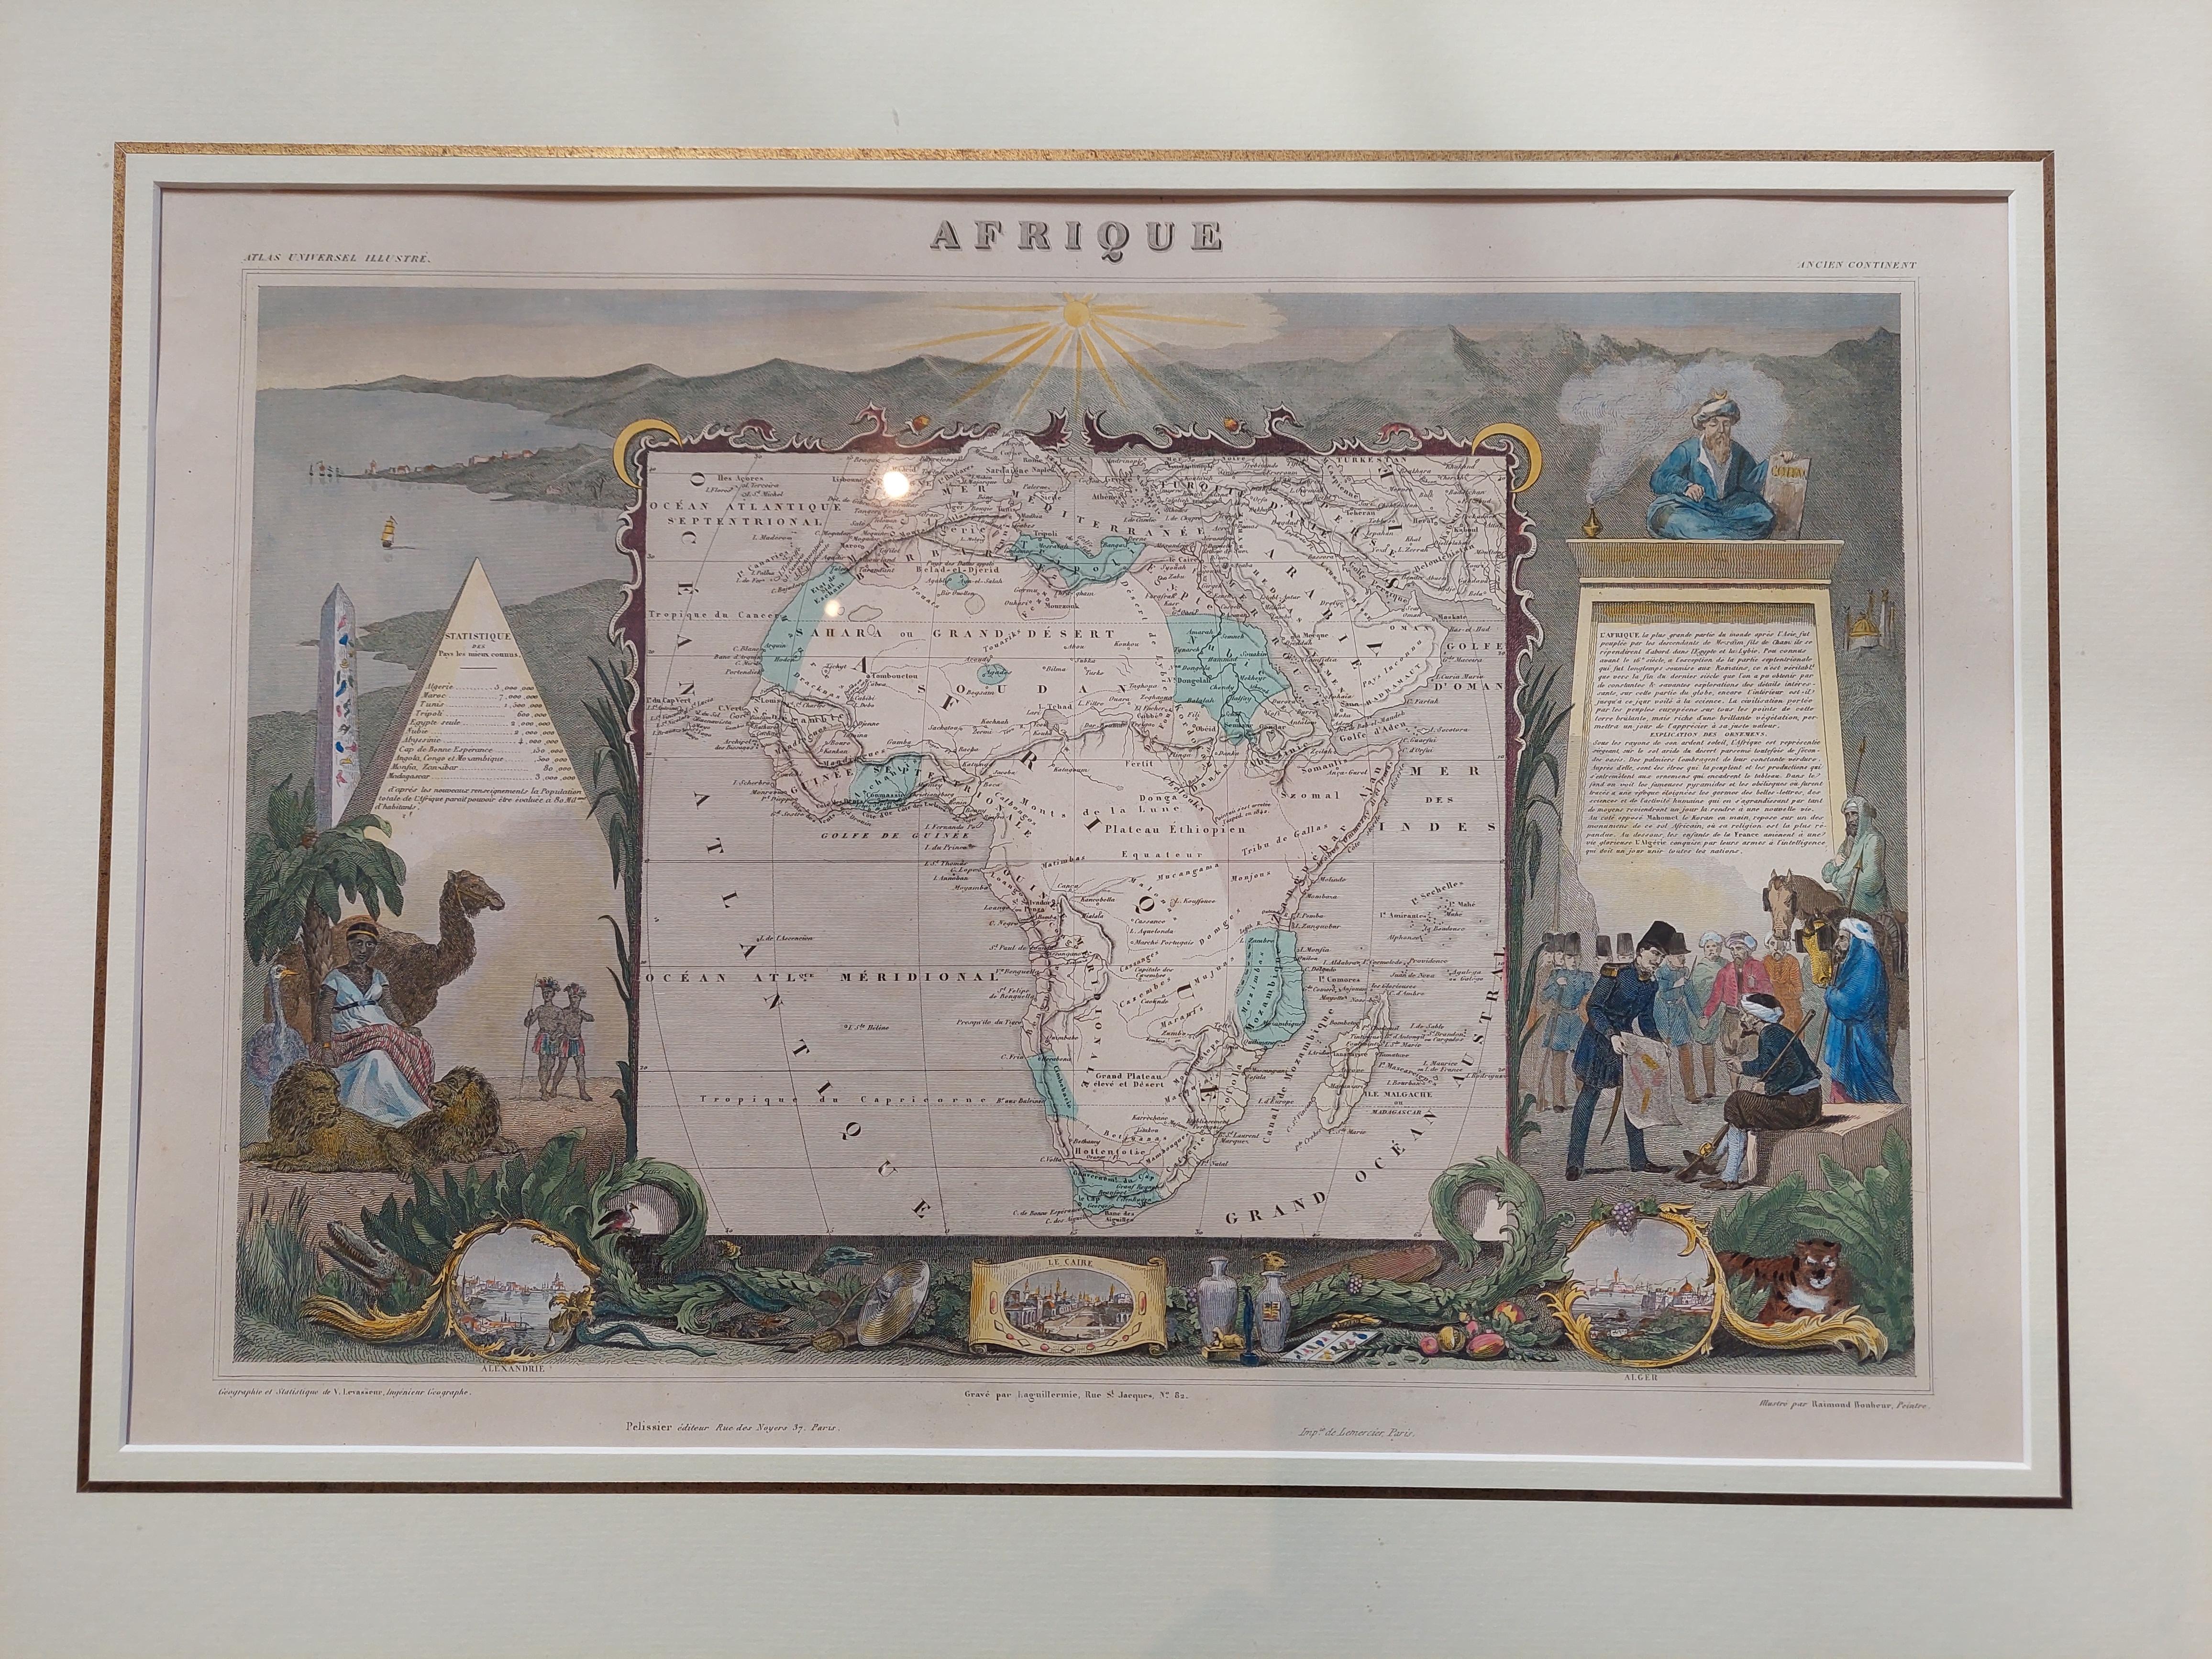 Antique map titled 'Afrique'. Original antique map of Africa. Decorative map of the continent surrounded by allegorical vignettes. Engraved by Raimond Bonheur, father of the famous French artist Rosa Bonheur. This map originates from 'Atlas National